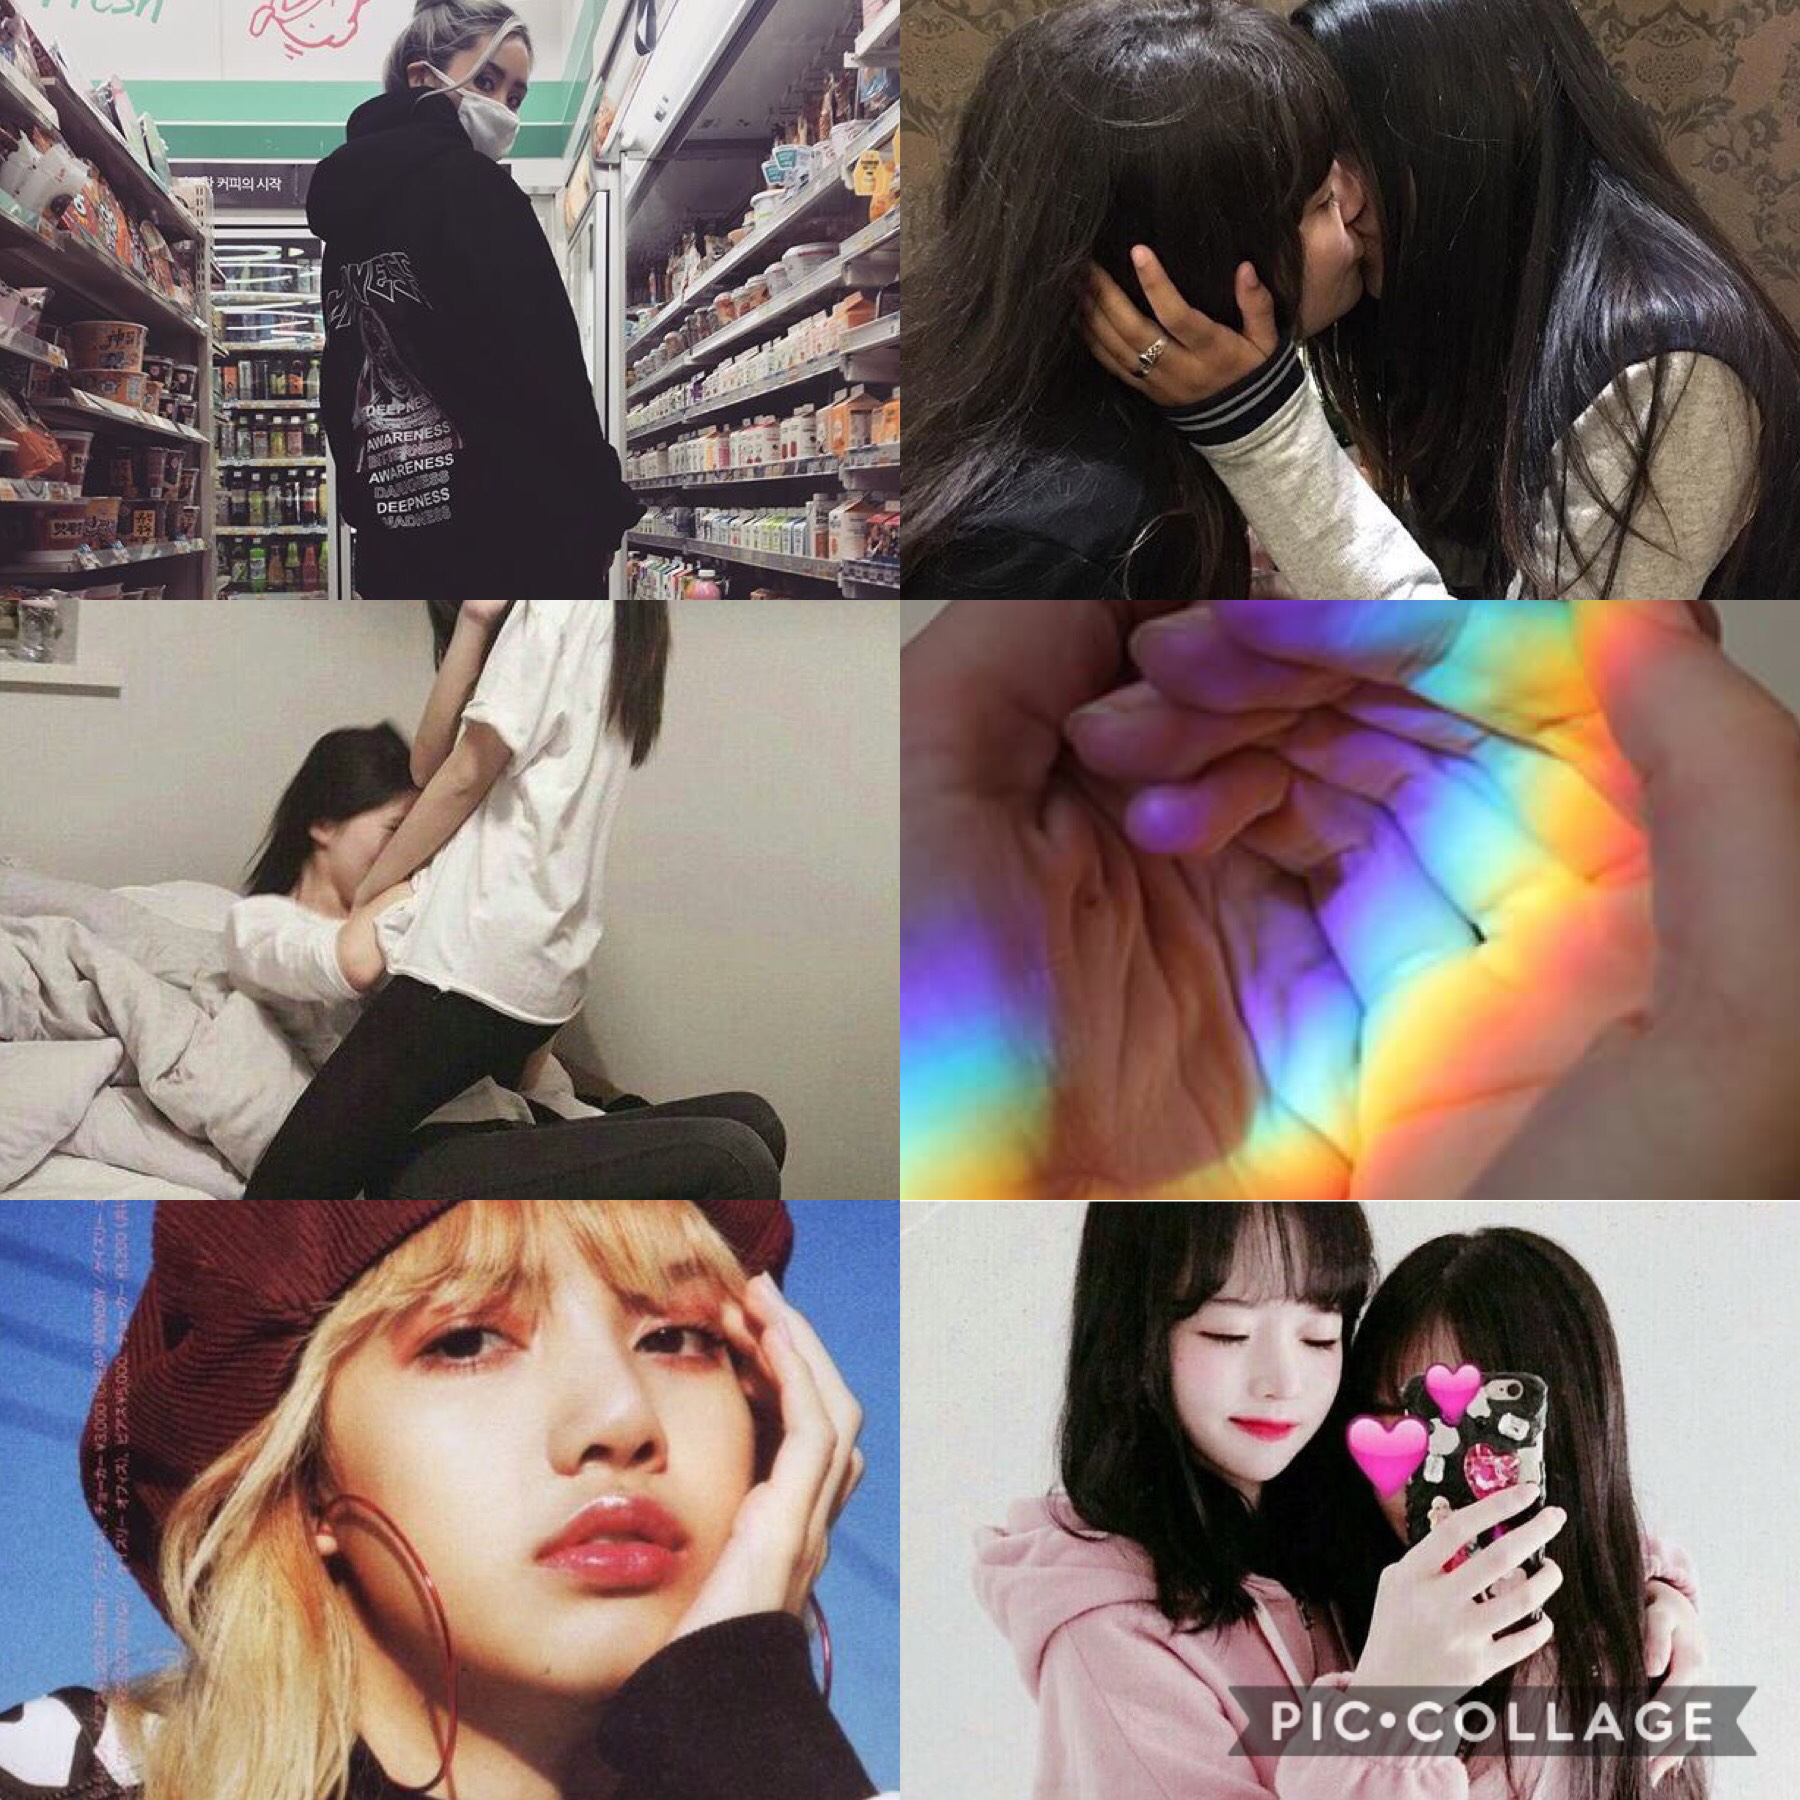 This is a GxG Aesthetic for BlackPink Lisa 